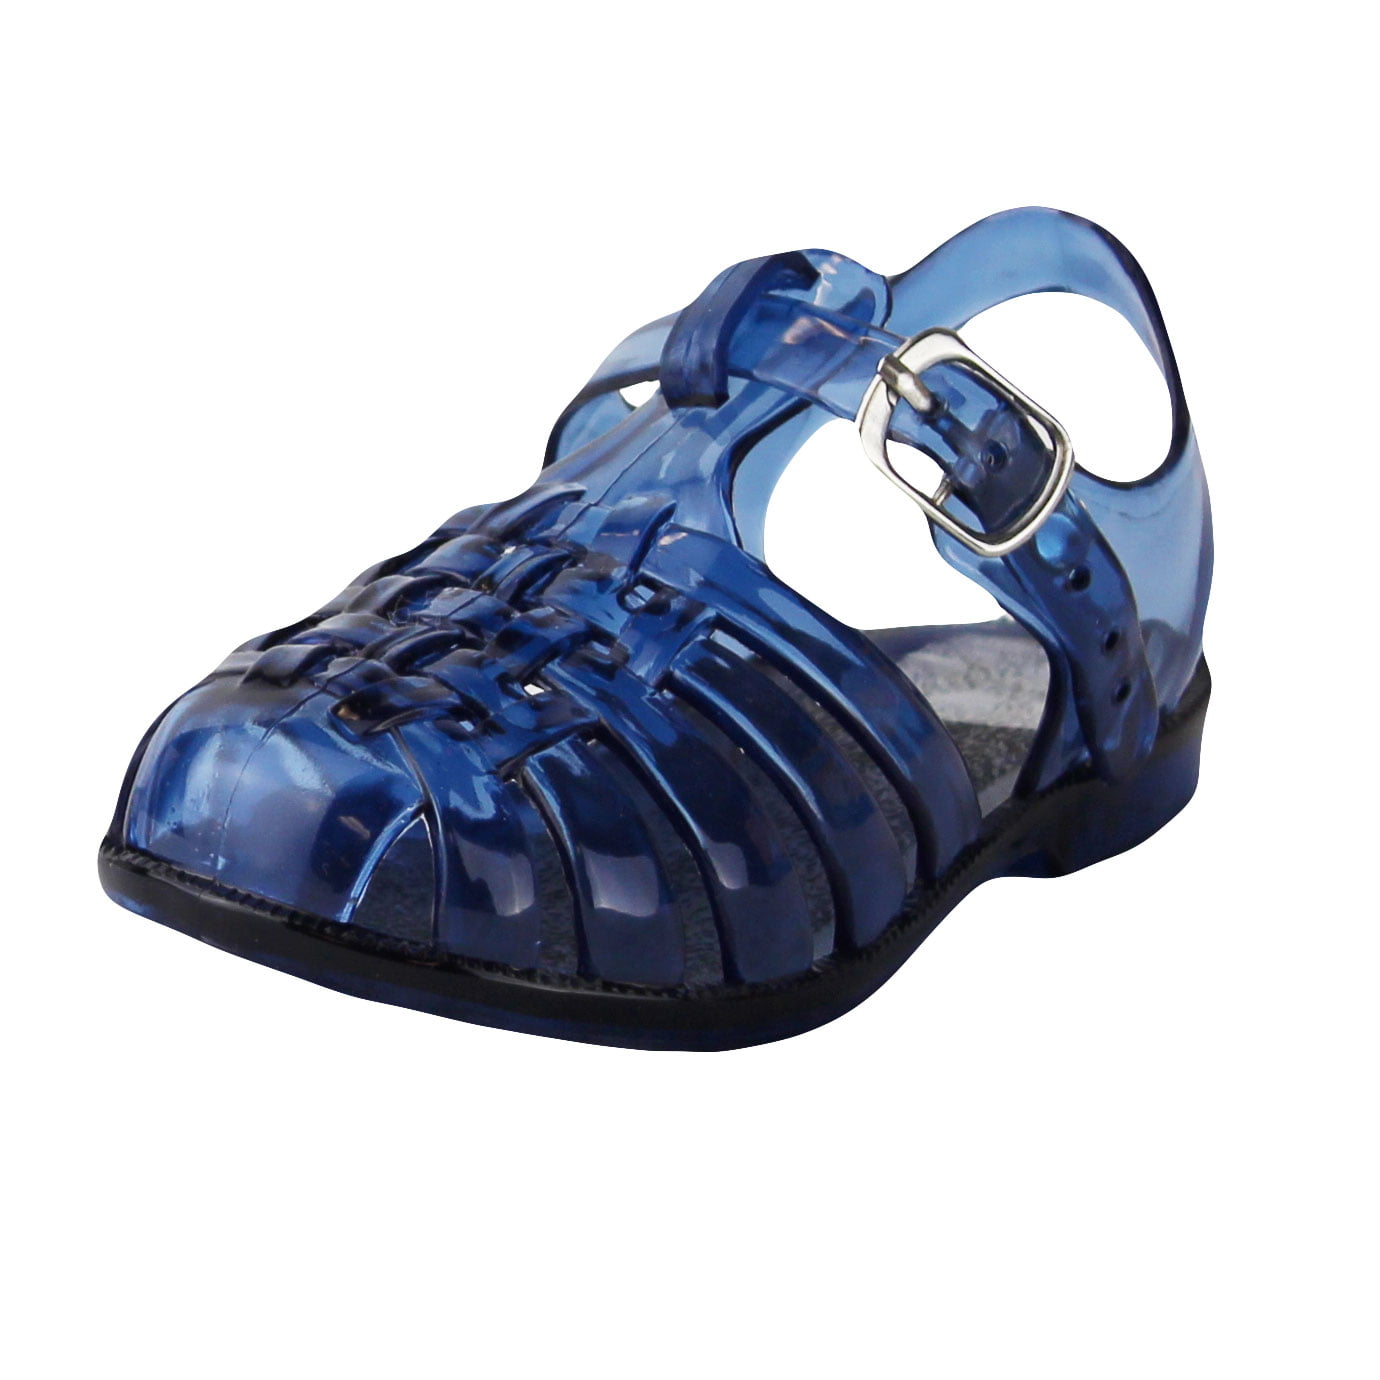 Boys/toddlers jelly sandals Size 3